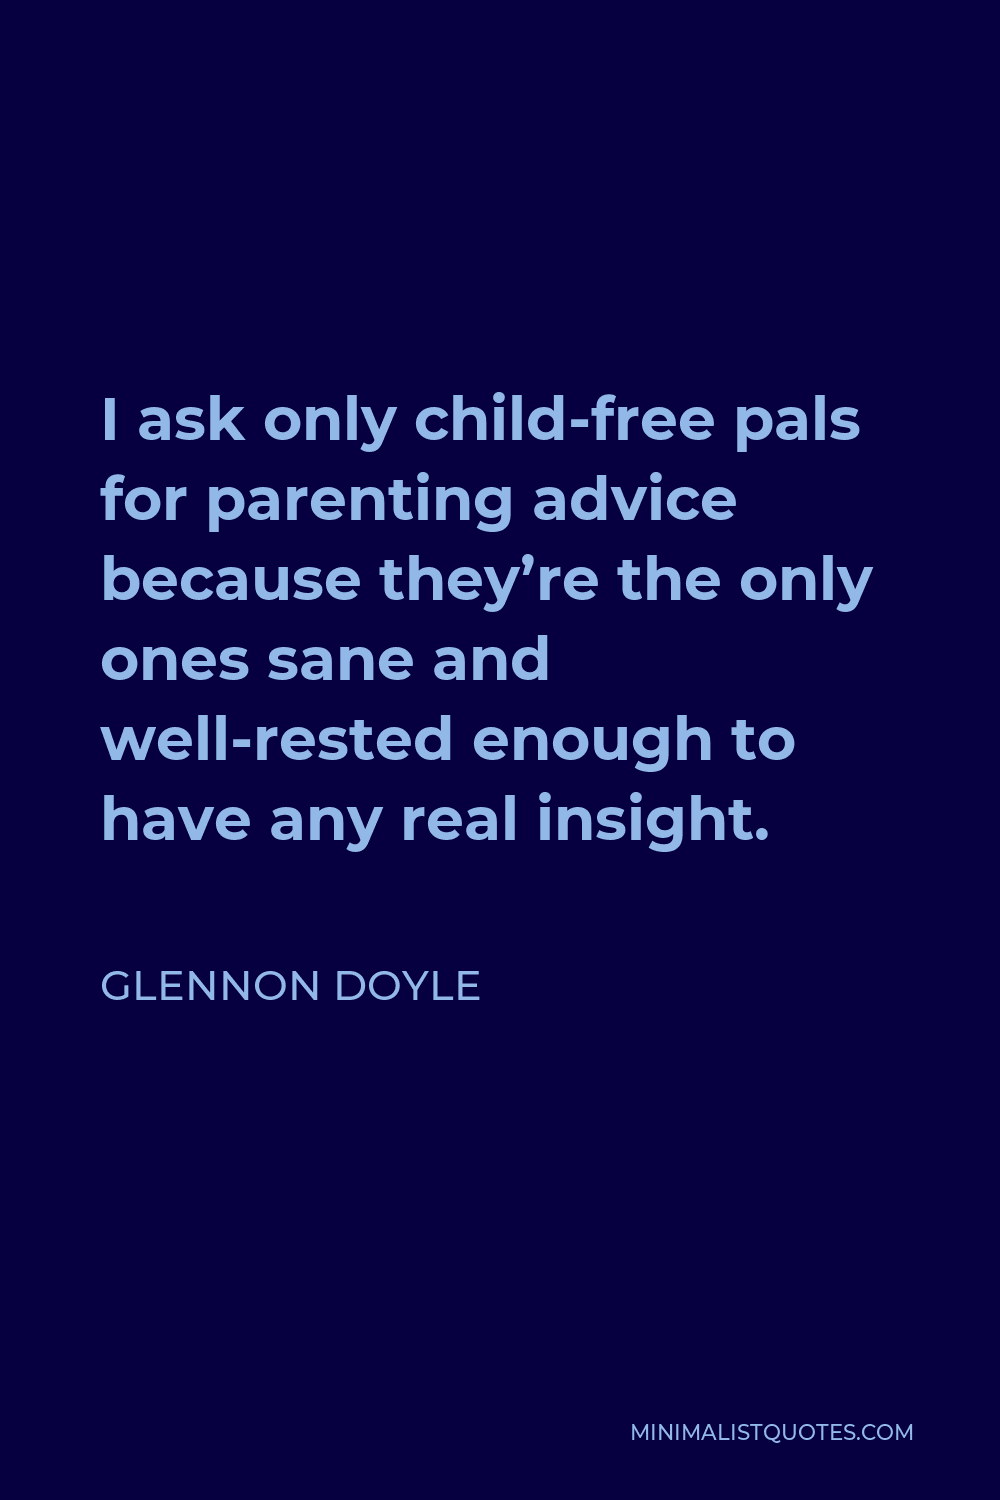 Glennon Doyle Quote - I ask only child-free pals for parenting advice because they’re the only ones sane and well-rested enough to have any real insight.